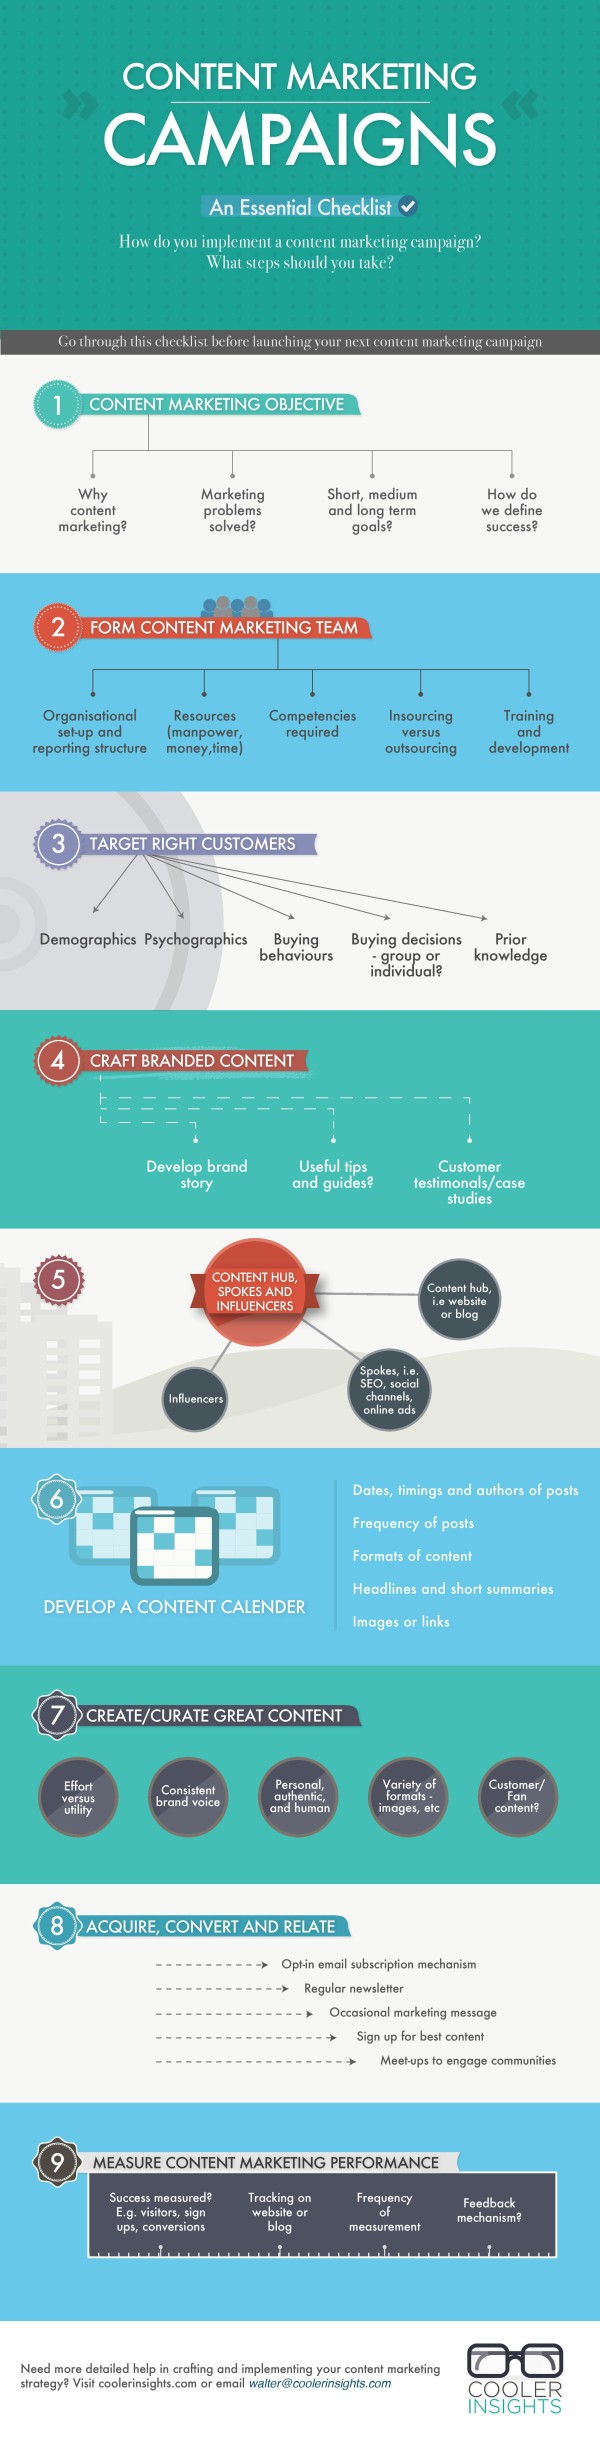 Content Marketing Campaigns – An Essential Checklist [Infographic]